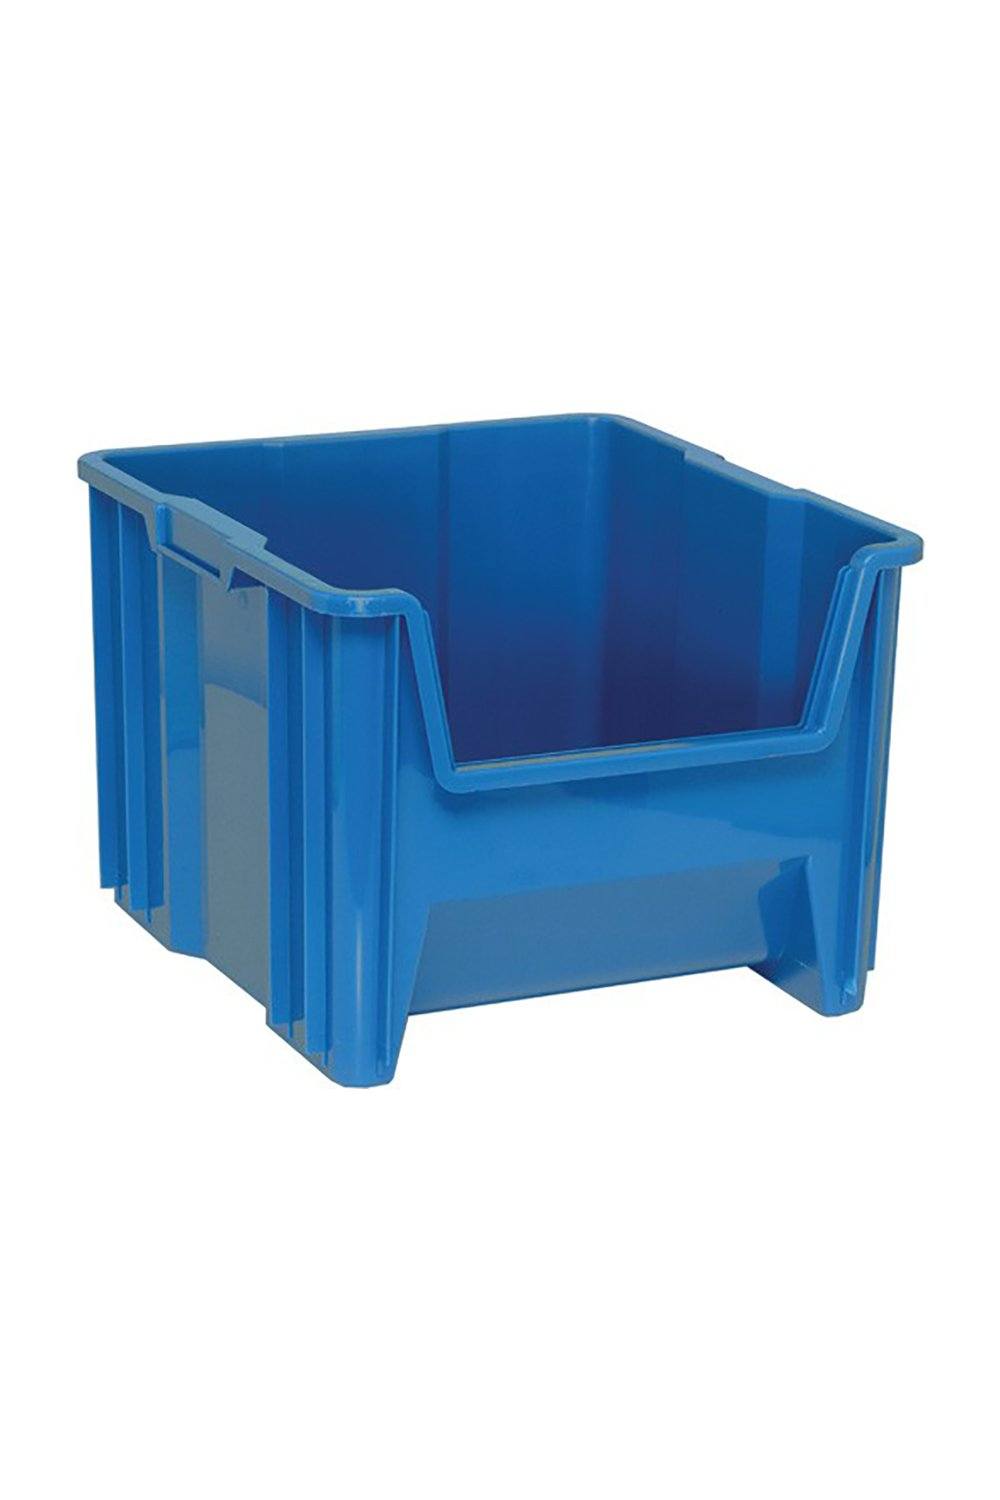 Giant Stack Container Bins & Containers Acart 17-1/2"L x 16-1/2"W x 12-1/2"H Blue 